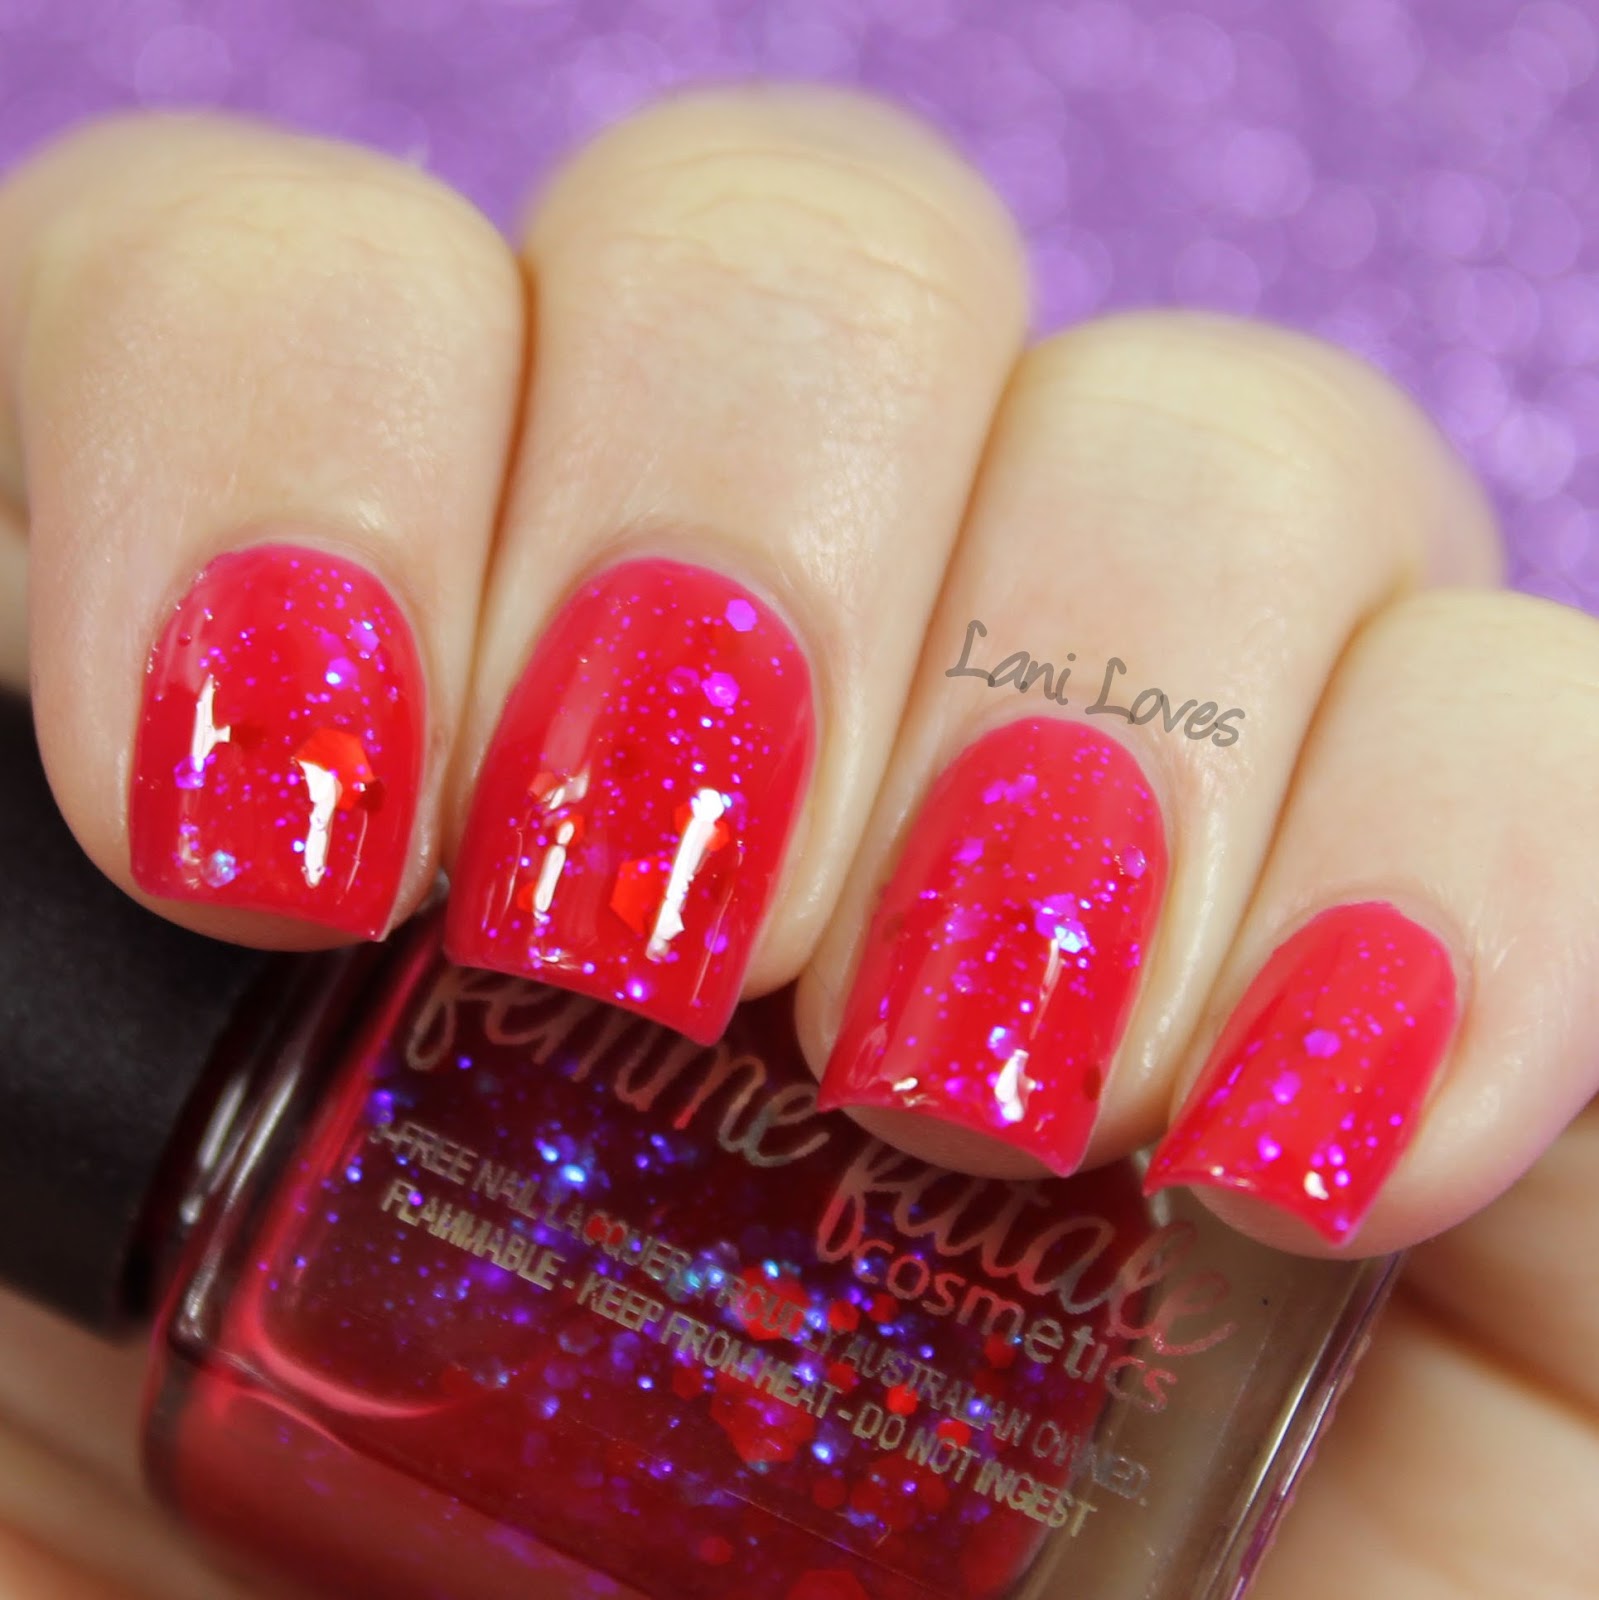 Femme Fatale Friday: Mana Ruby Nail Polish Swatches & Review